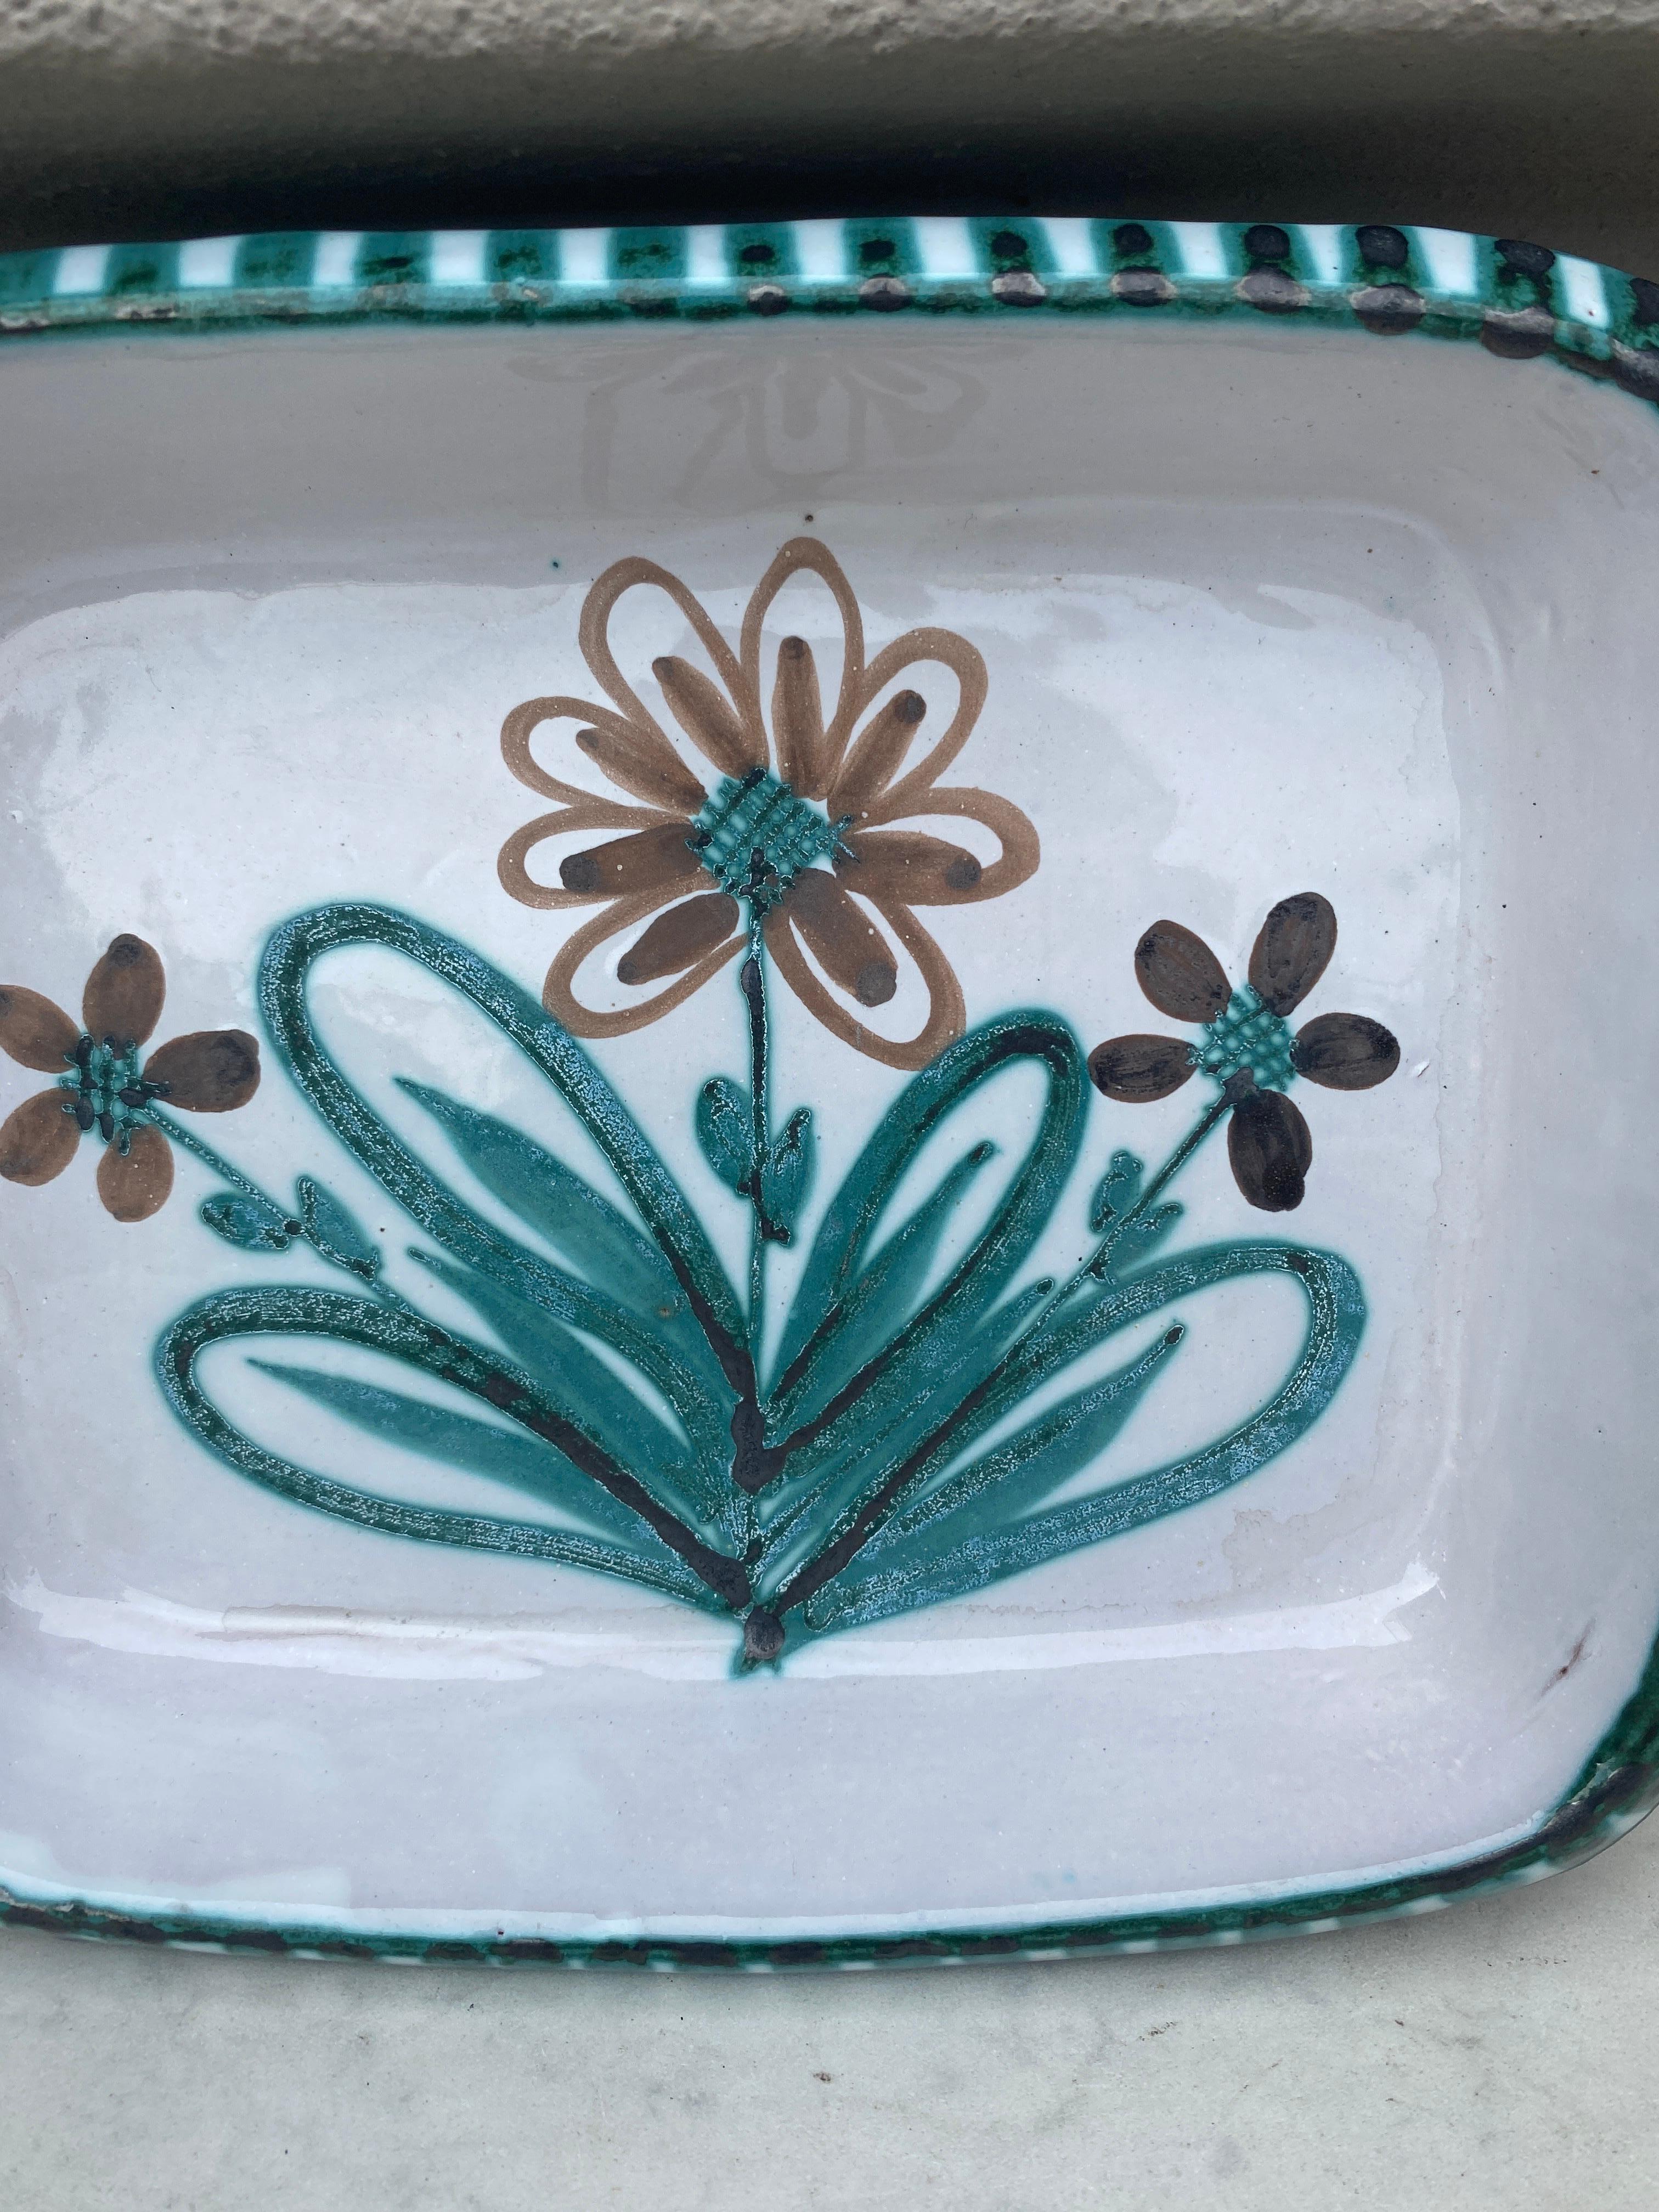 Large Mid-century French Ceramic dish signed Robert Picault Vallauris.
Decorated with flowers.